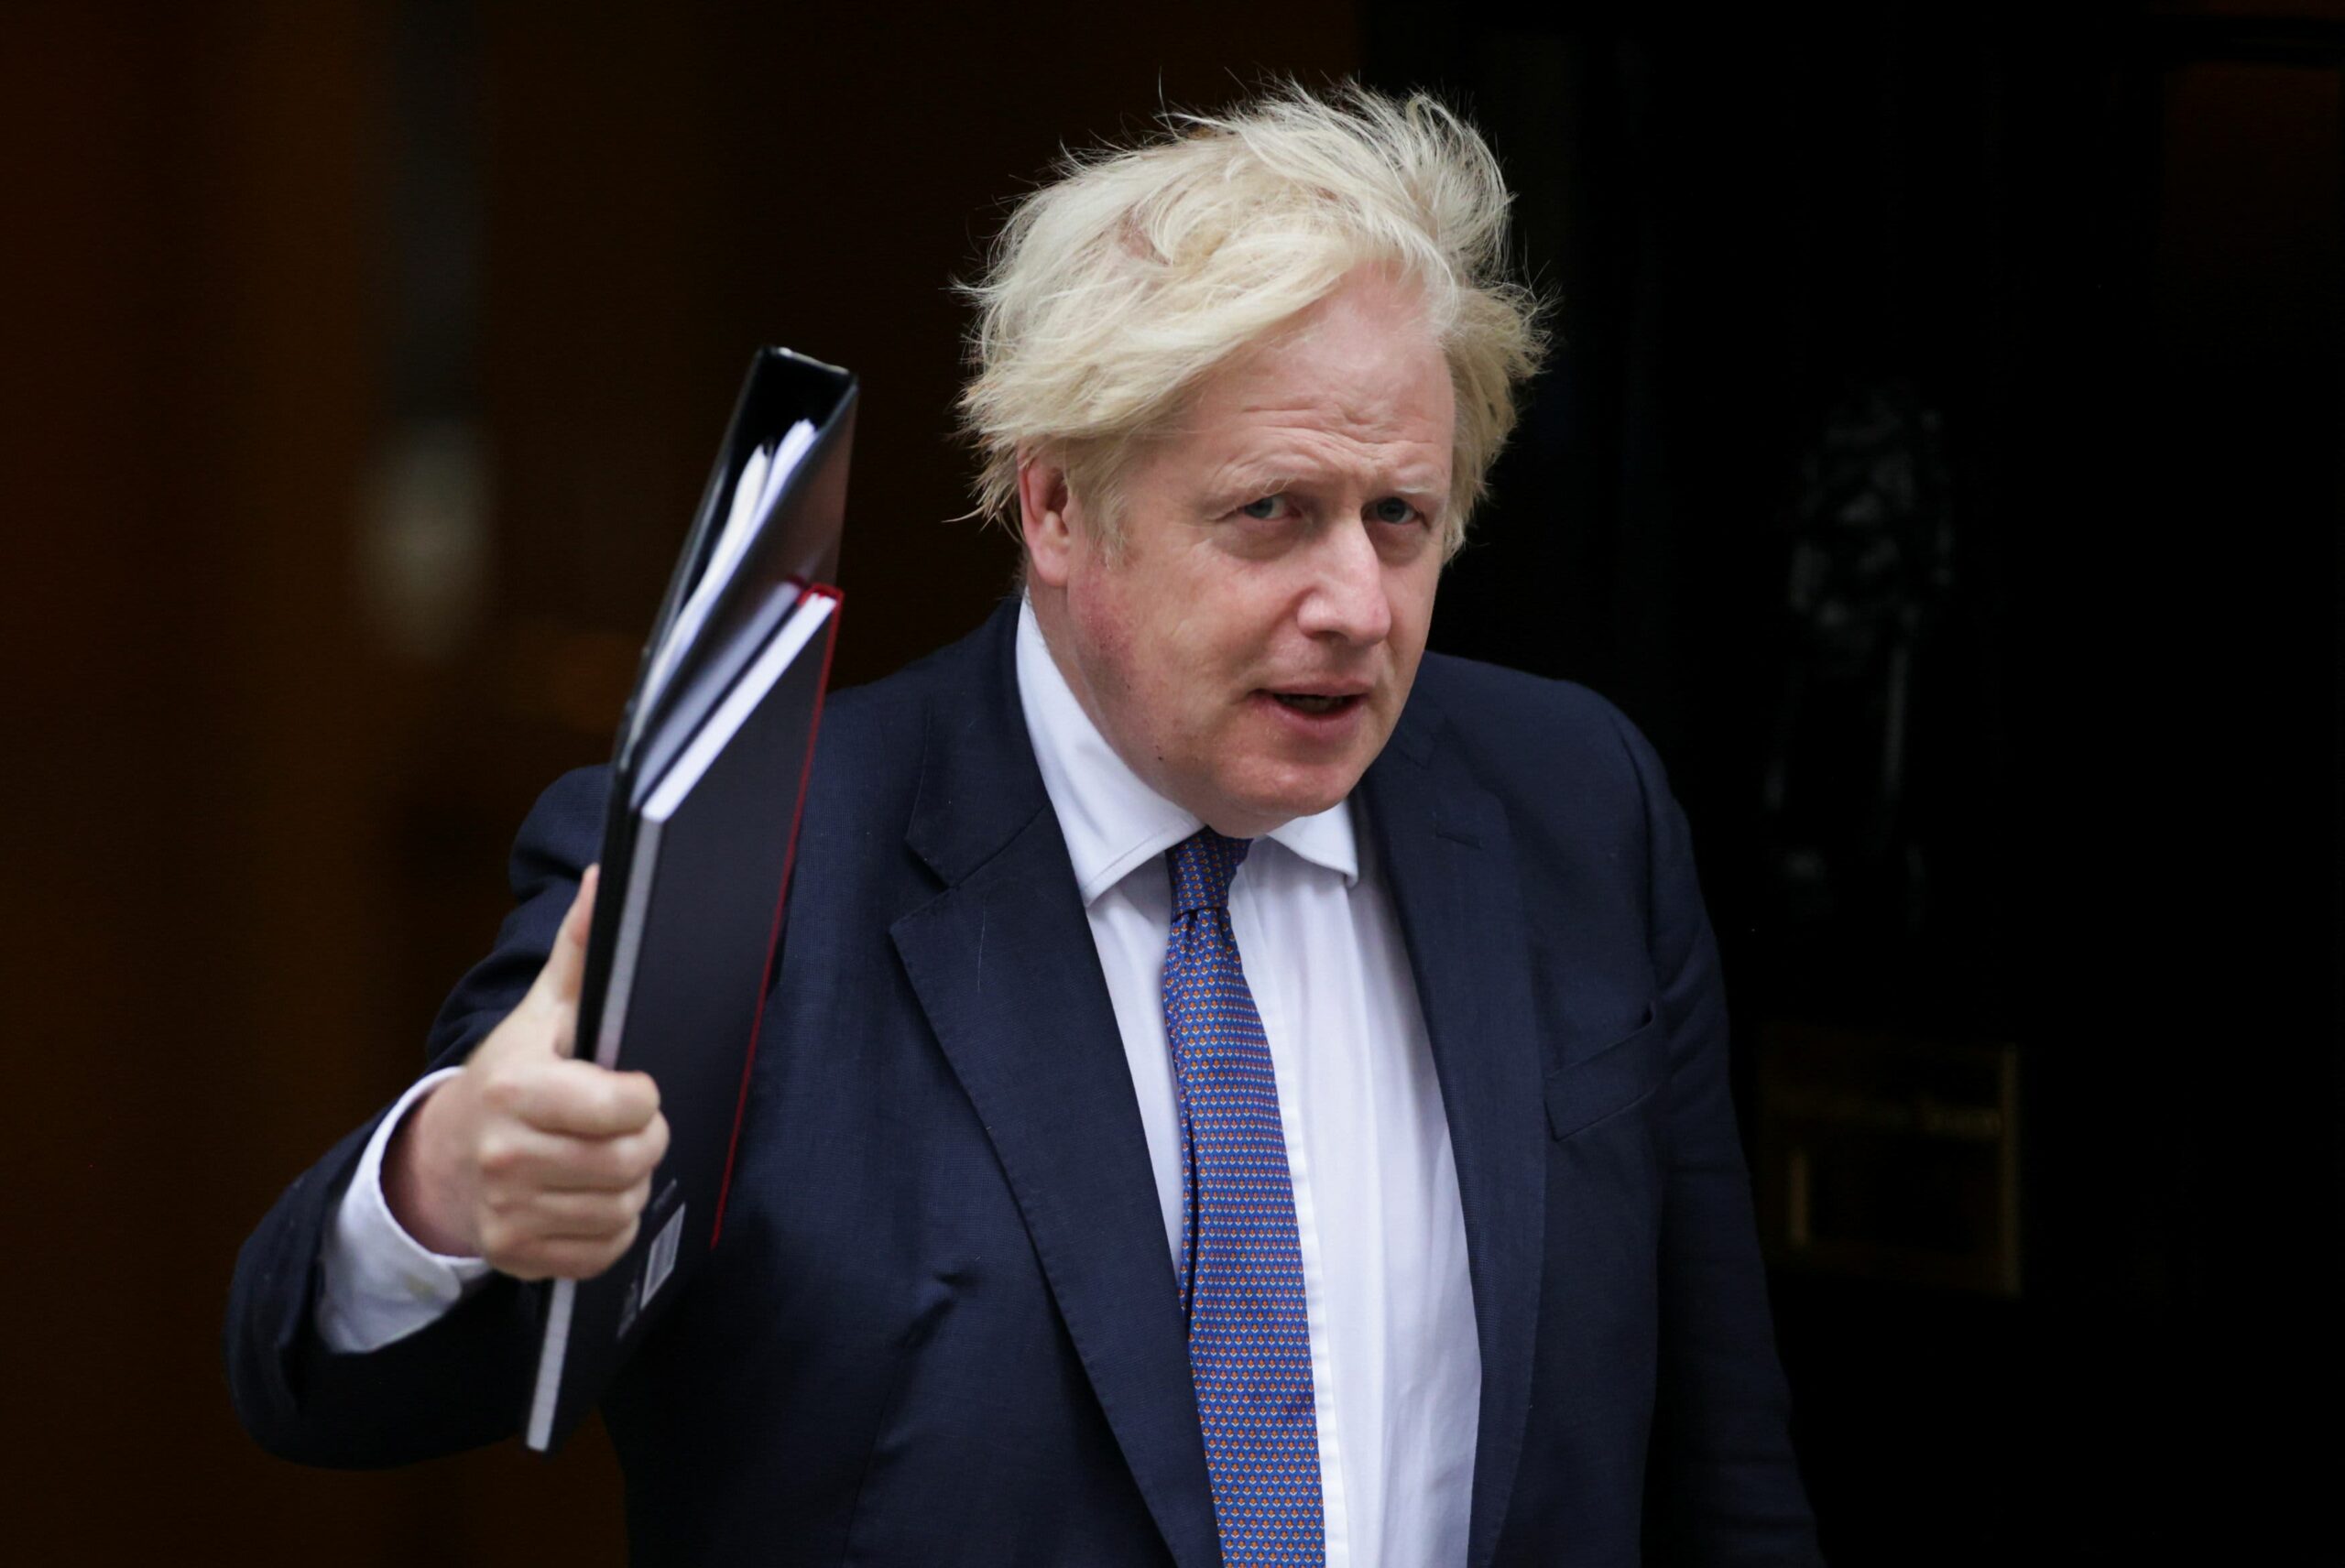 Boris Johnson to hike taxes to deal with Covid and social care crises